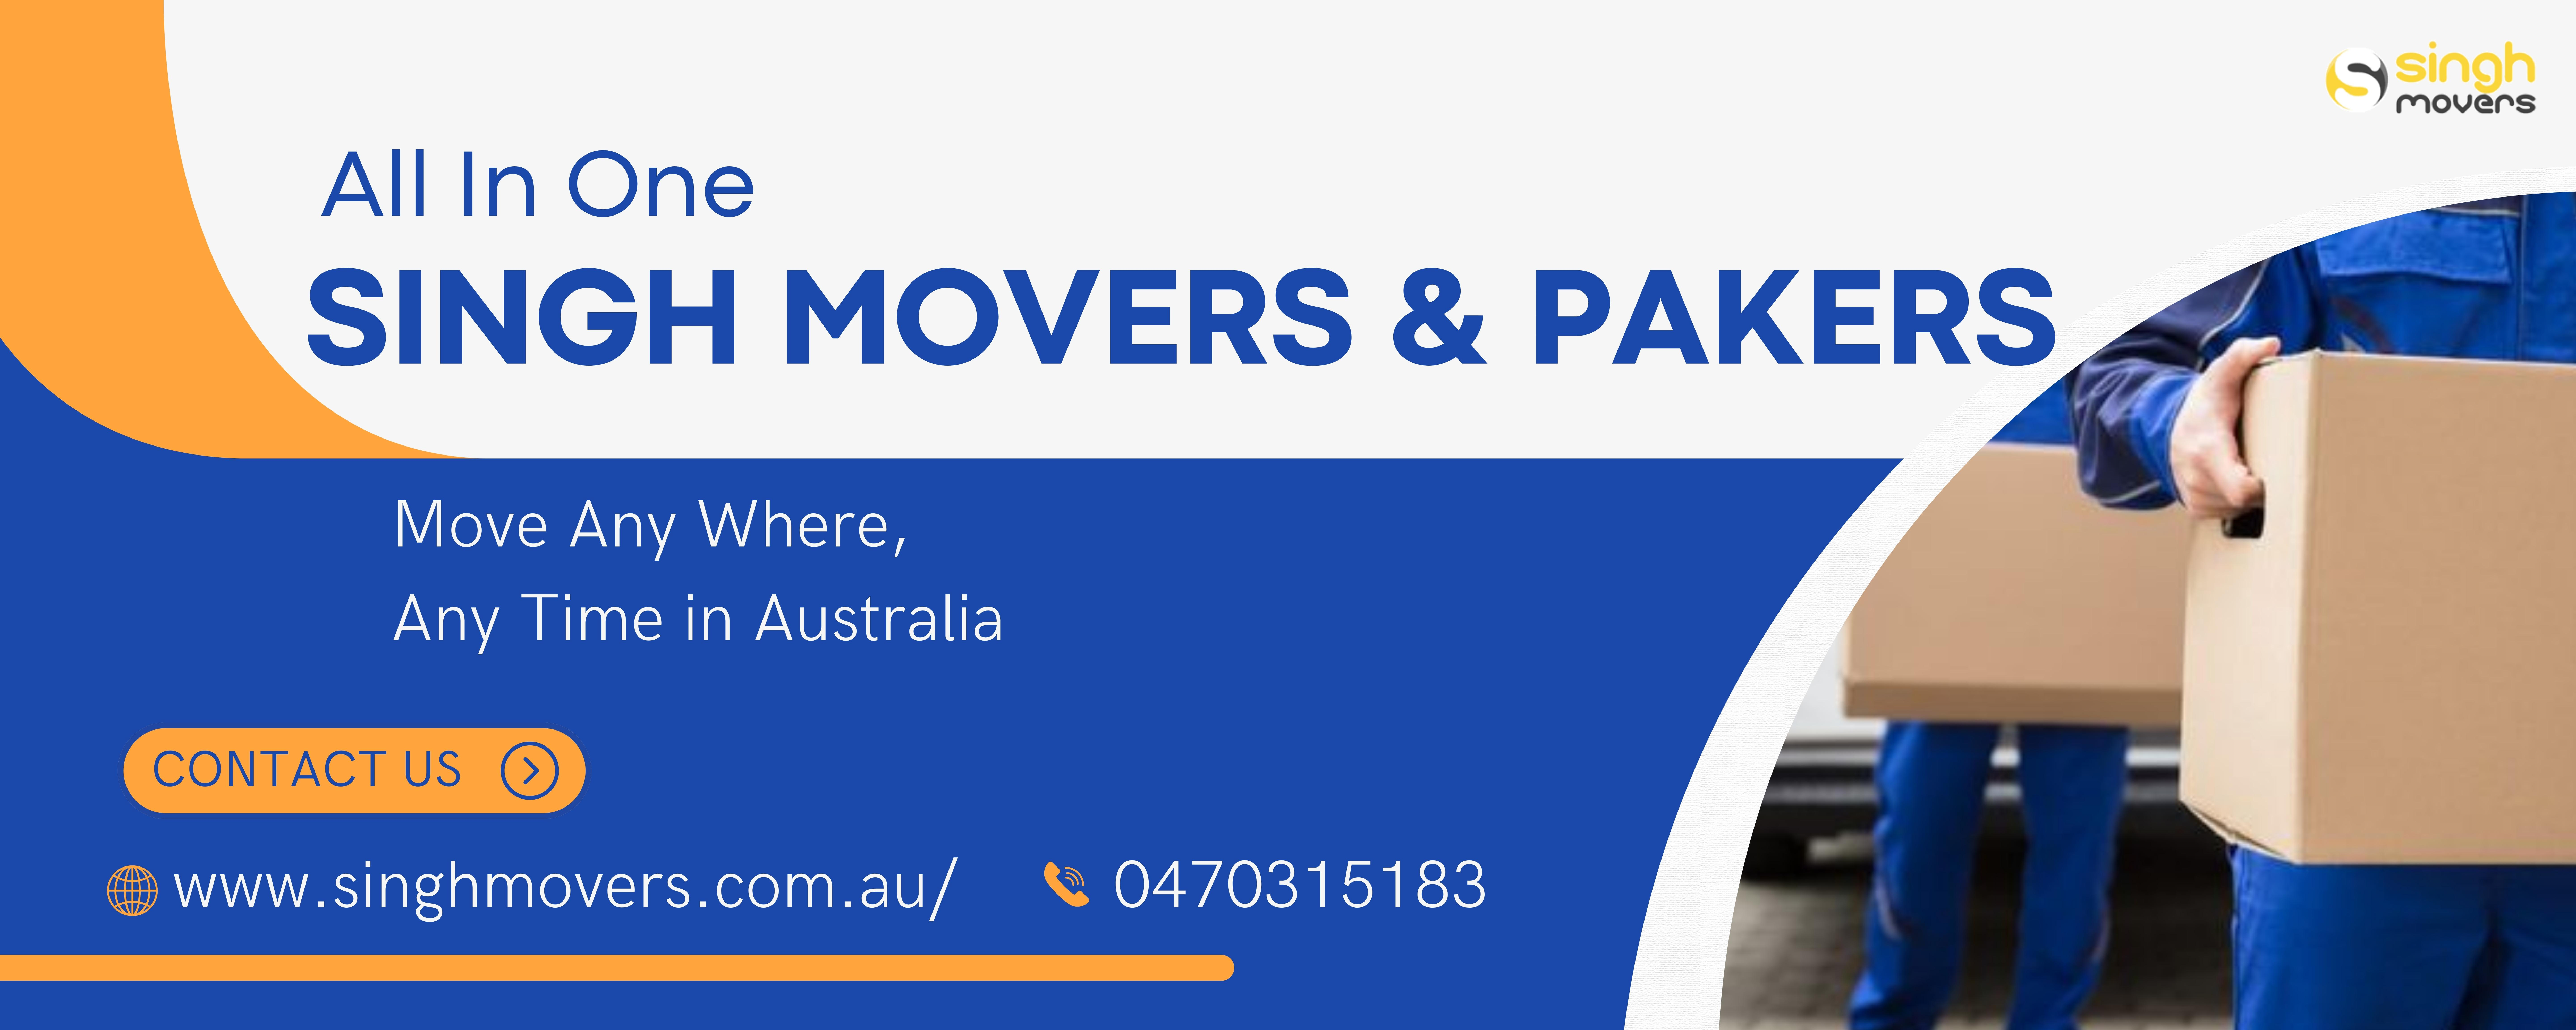 singh movers and packers